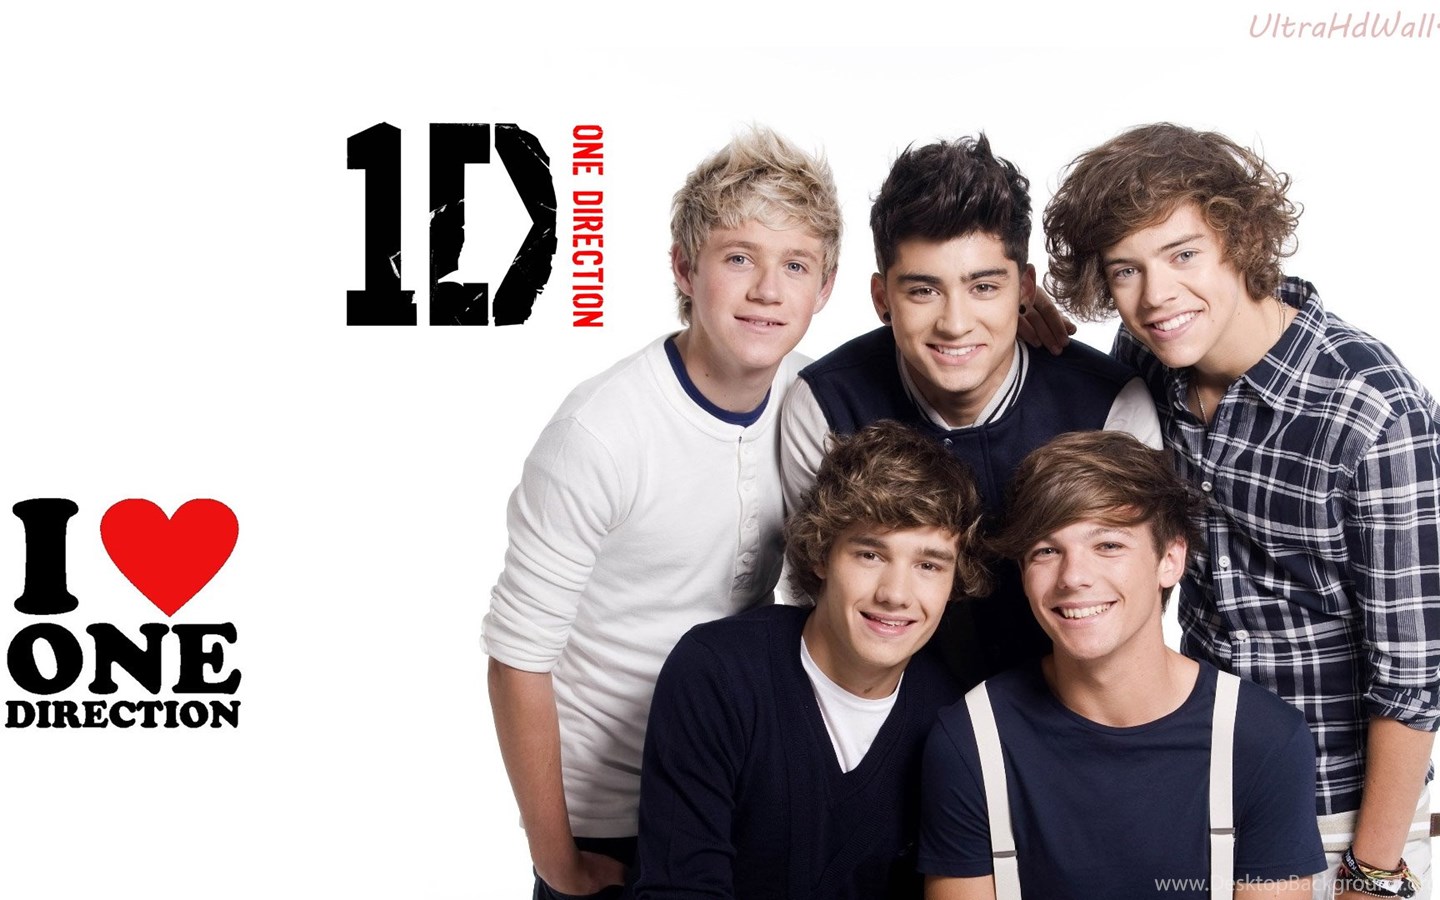 Download Wallpapers One Direction One Direction 2015 - One Direction , HD Wallpaper & Backgrounds